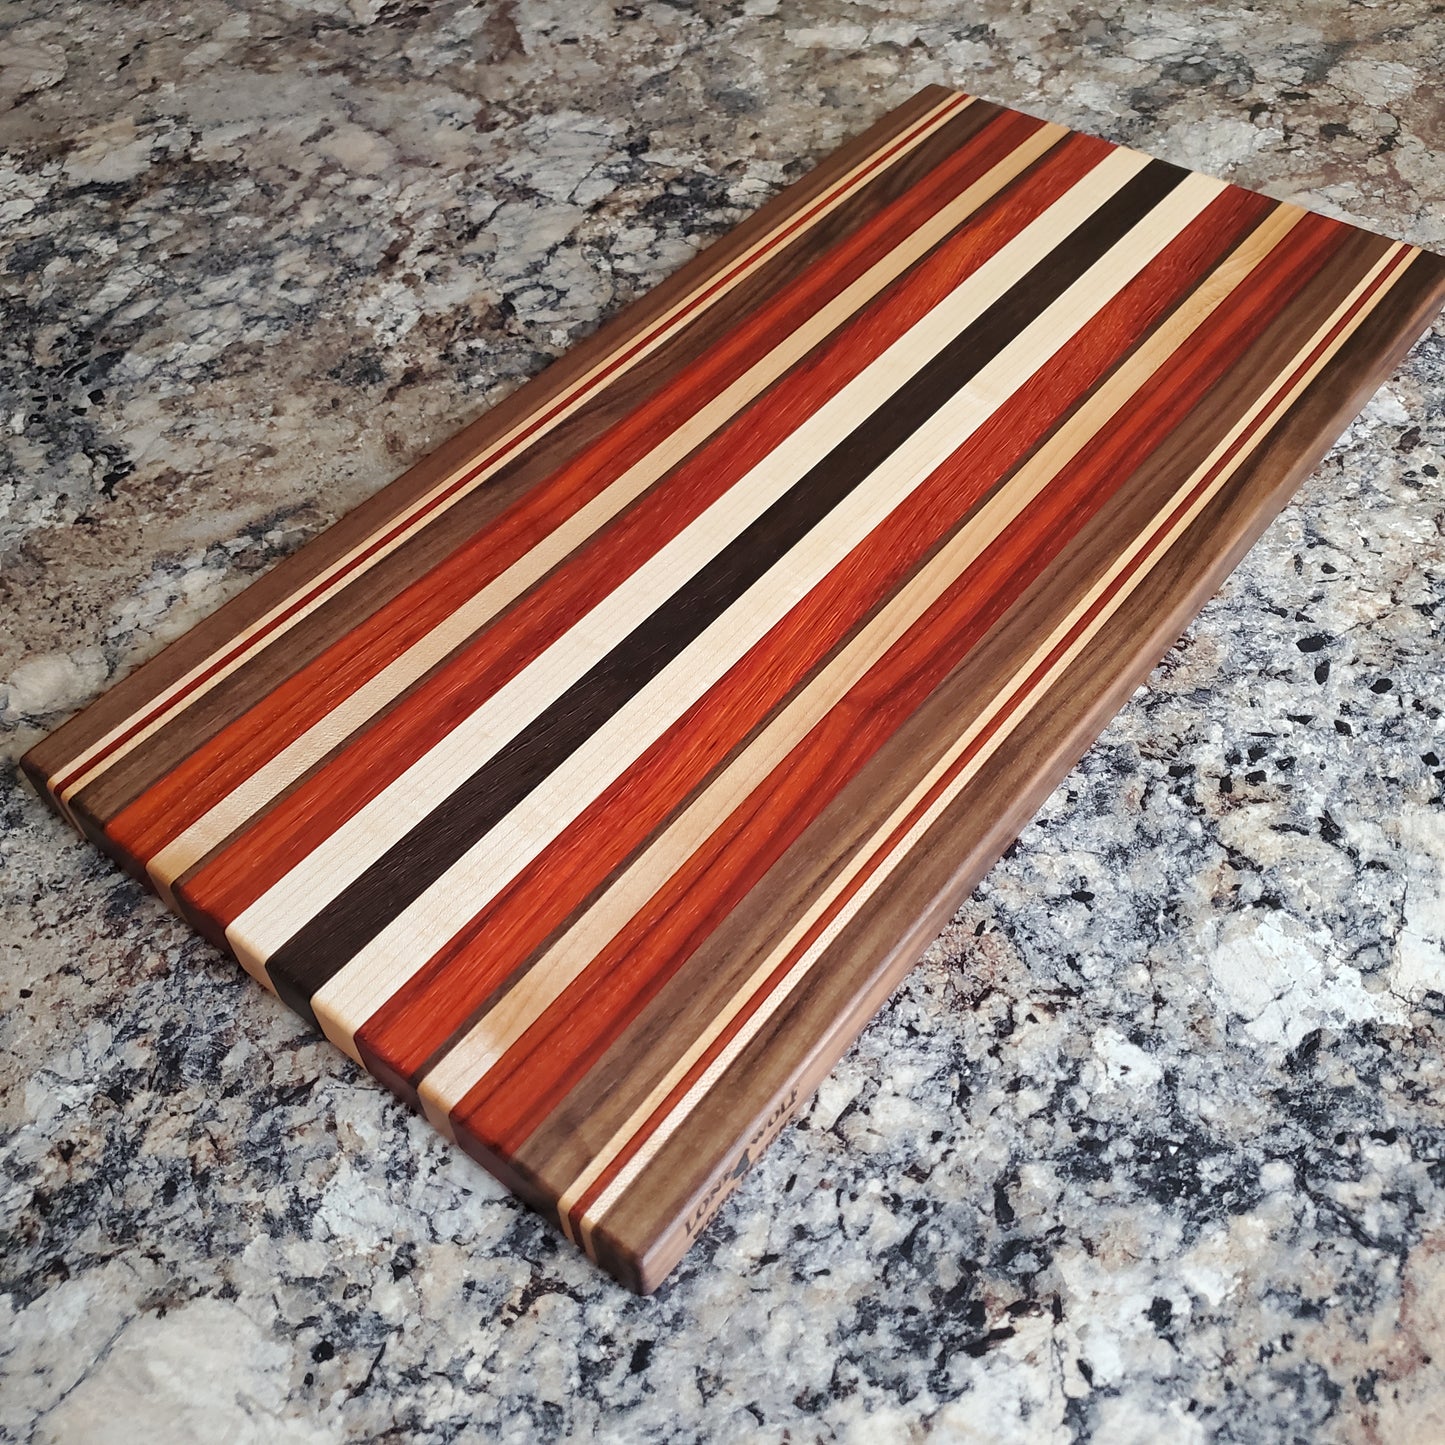 Signature Series October Fest cutting board made from maple, walnut, padauk, and wenge by Lone Wolf Wood Designs